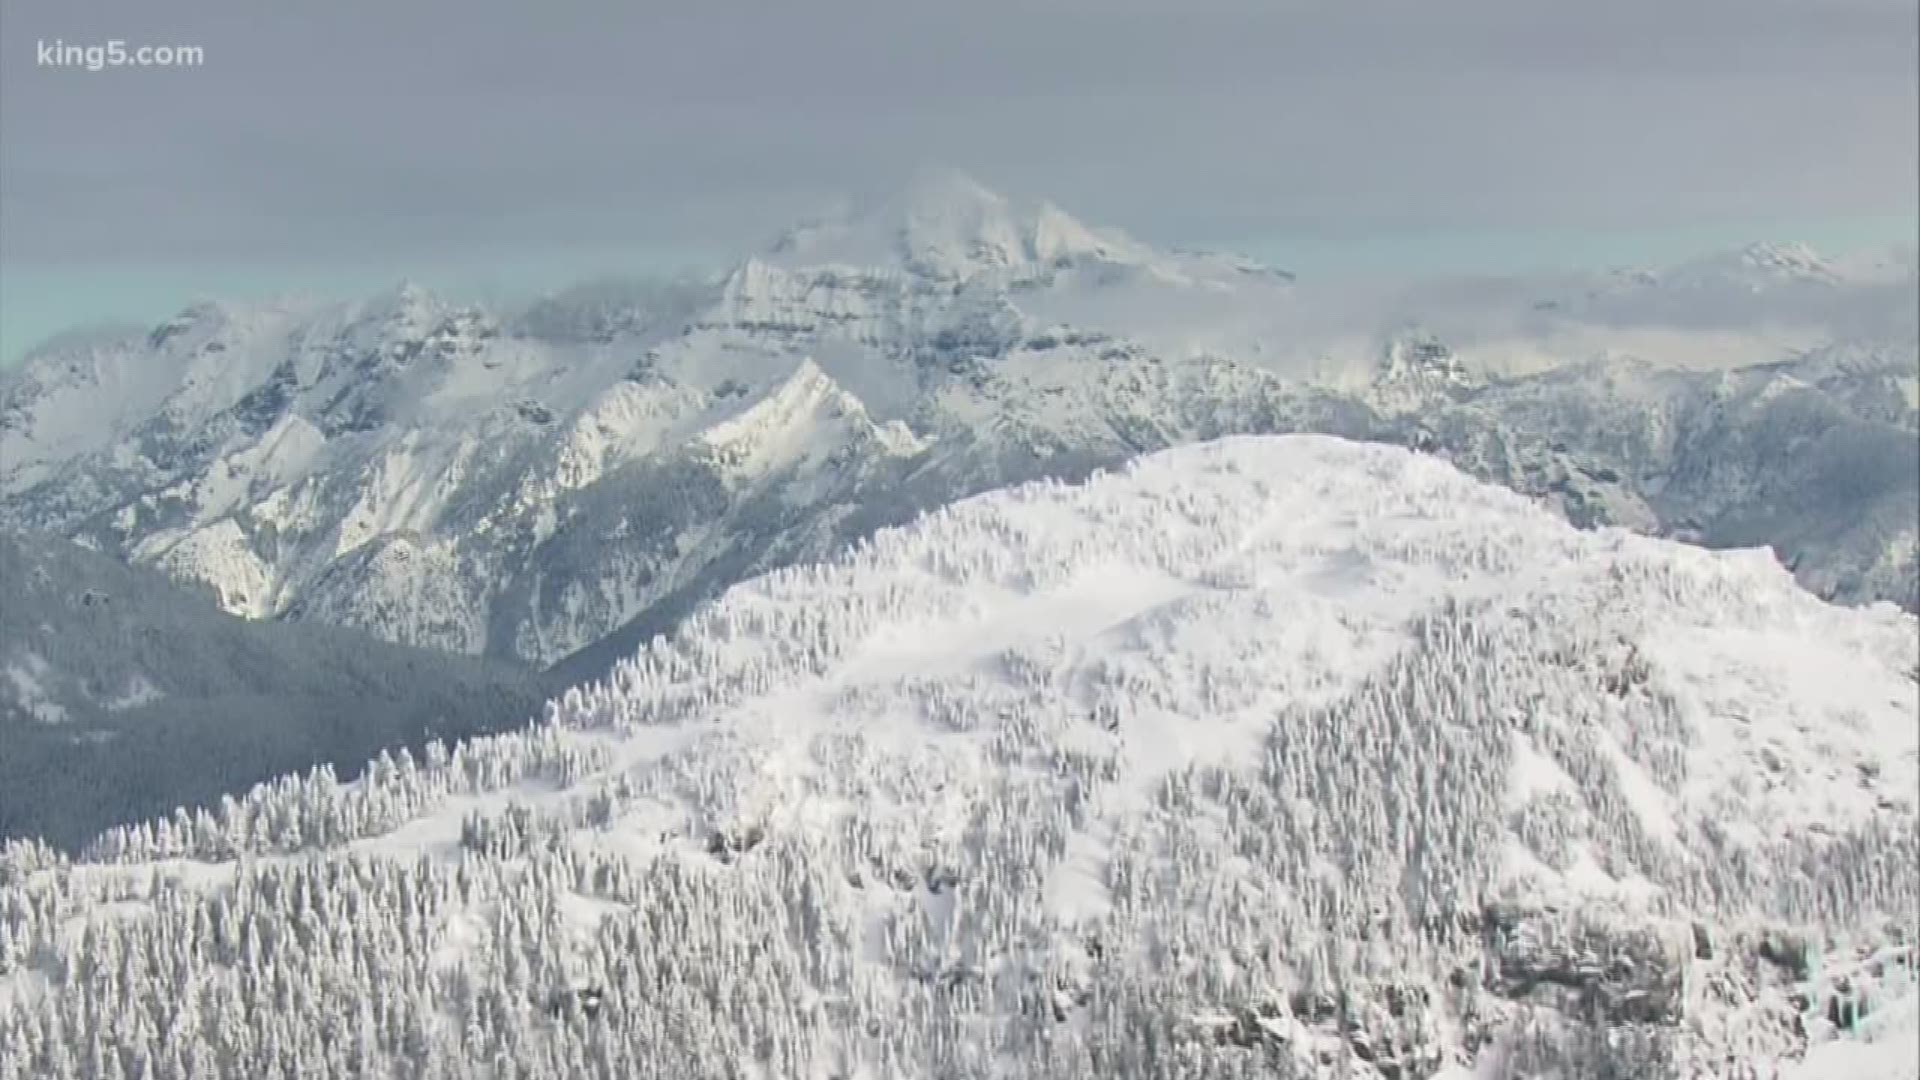 The storms that slammed Washington's mountains over the past week have, in some cases, more than made up for the snowpack deficit. KING 5's Glenn Farley reports.